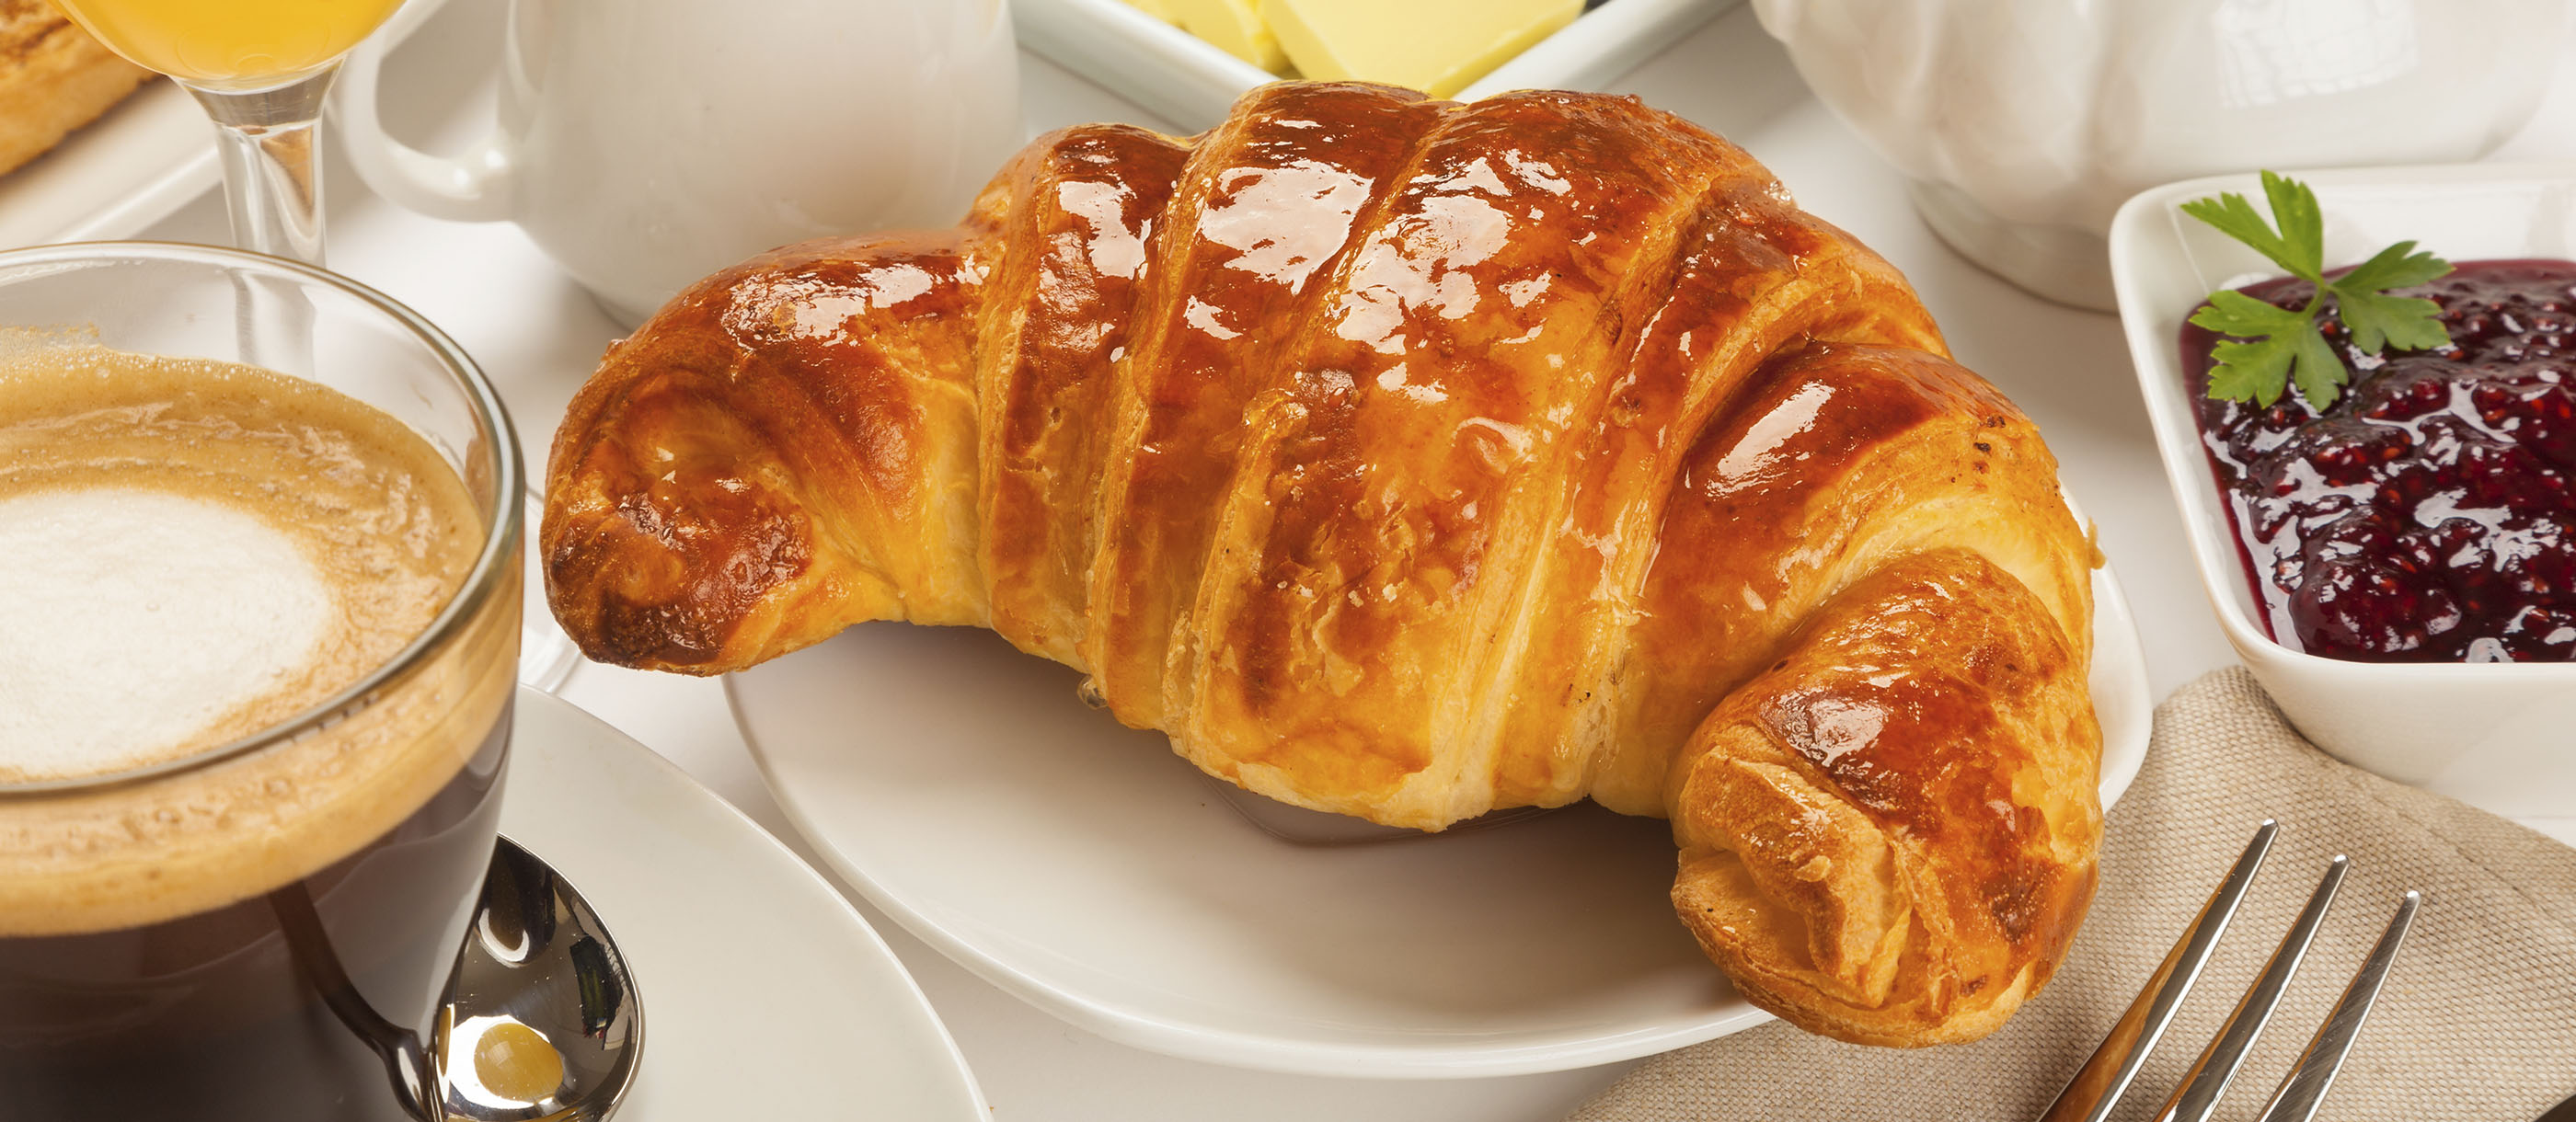 Croissant | Traditional Sweet Pastry From France